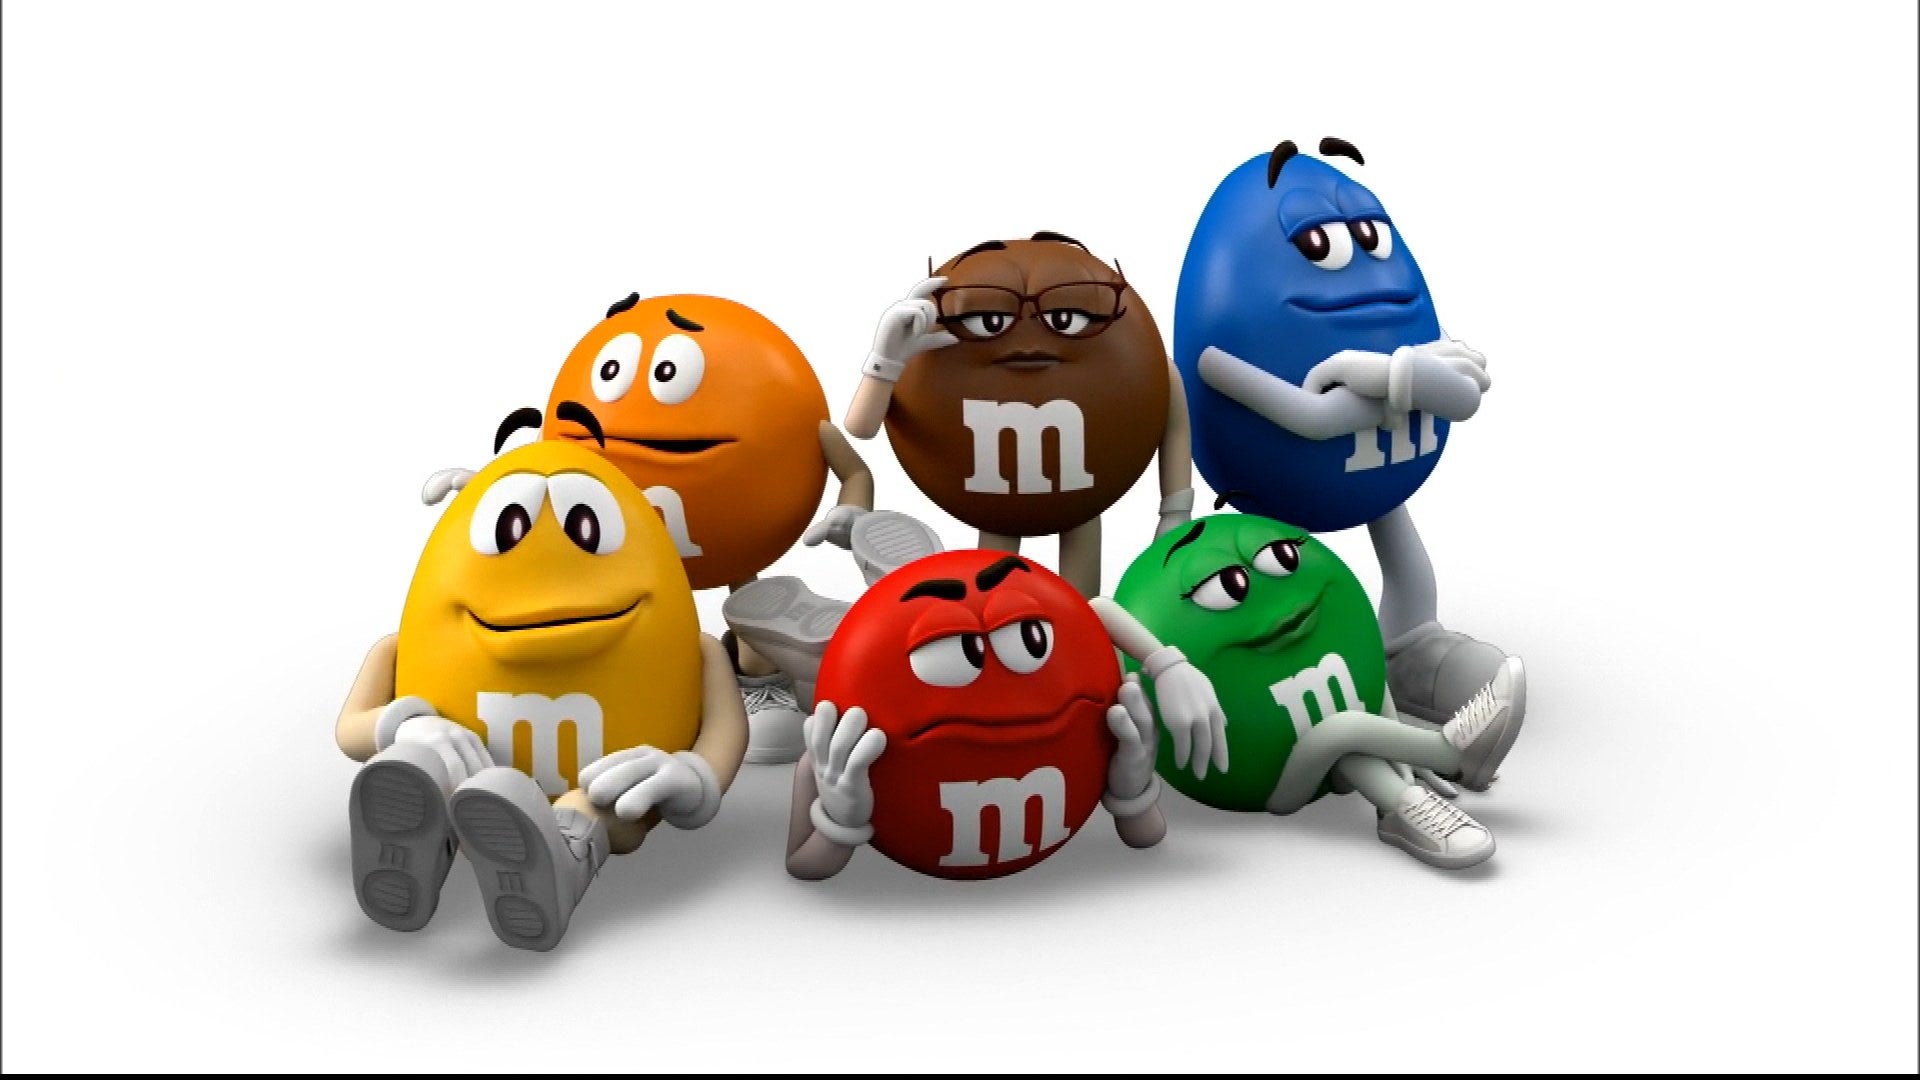 M&M's Spokescandies Executed by Firing Squad at Super Bowl - The